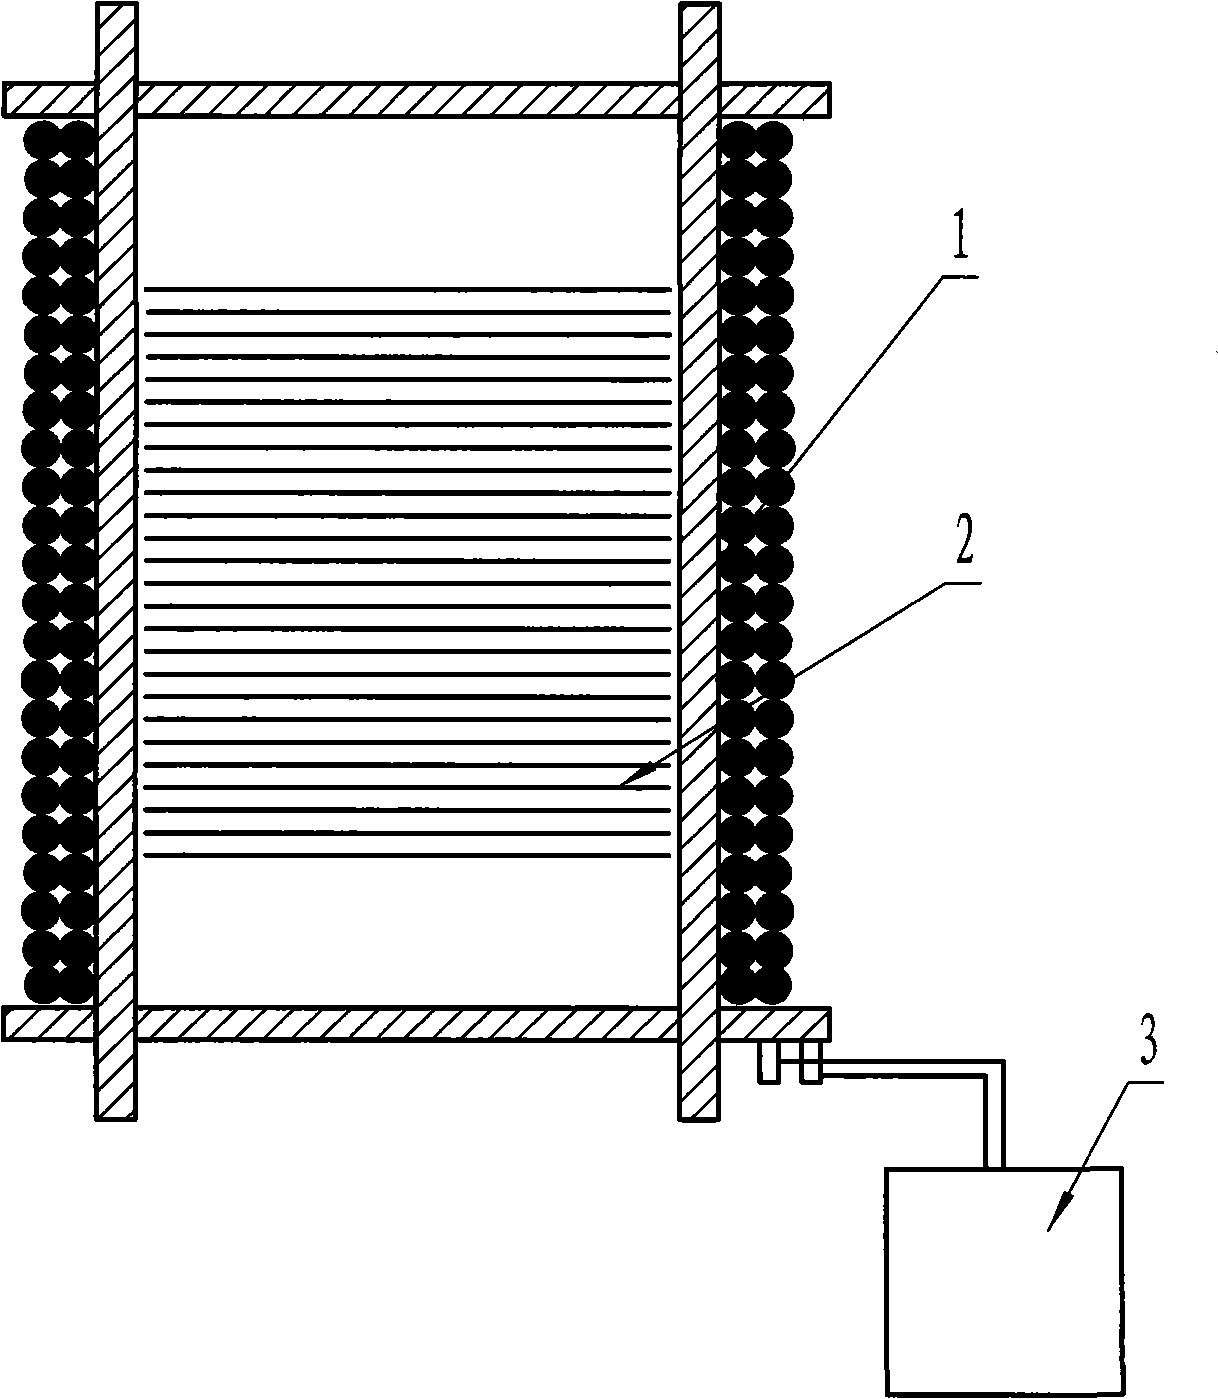 Low-frequency high-gradient magnetic field scale inhibiting cleaner